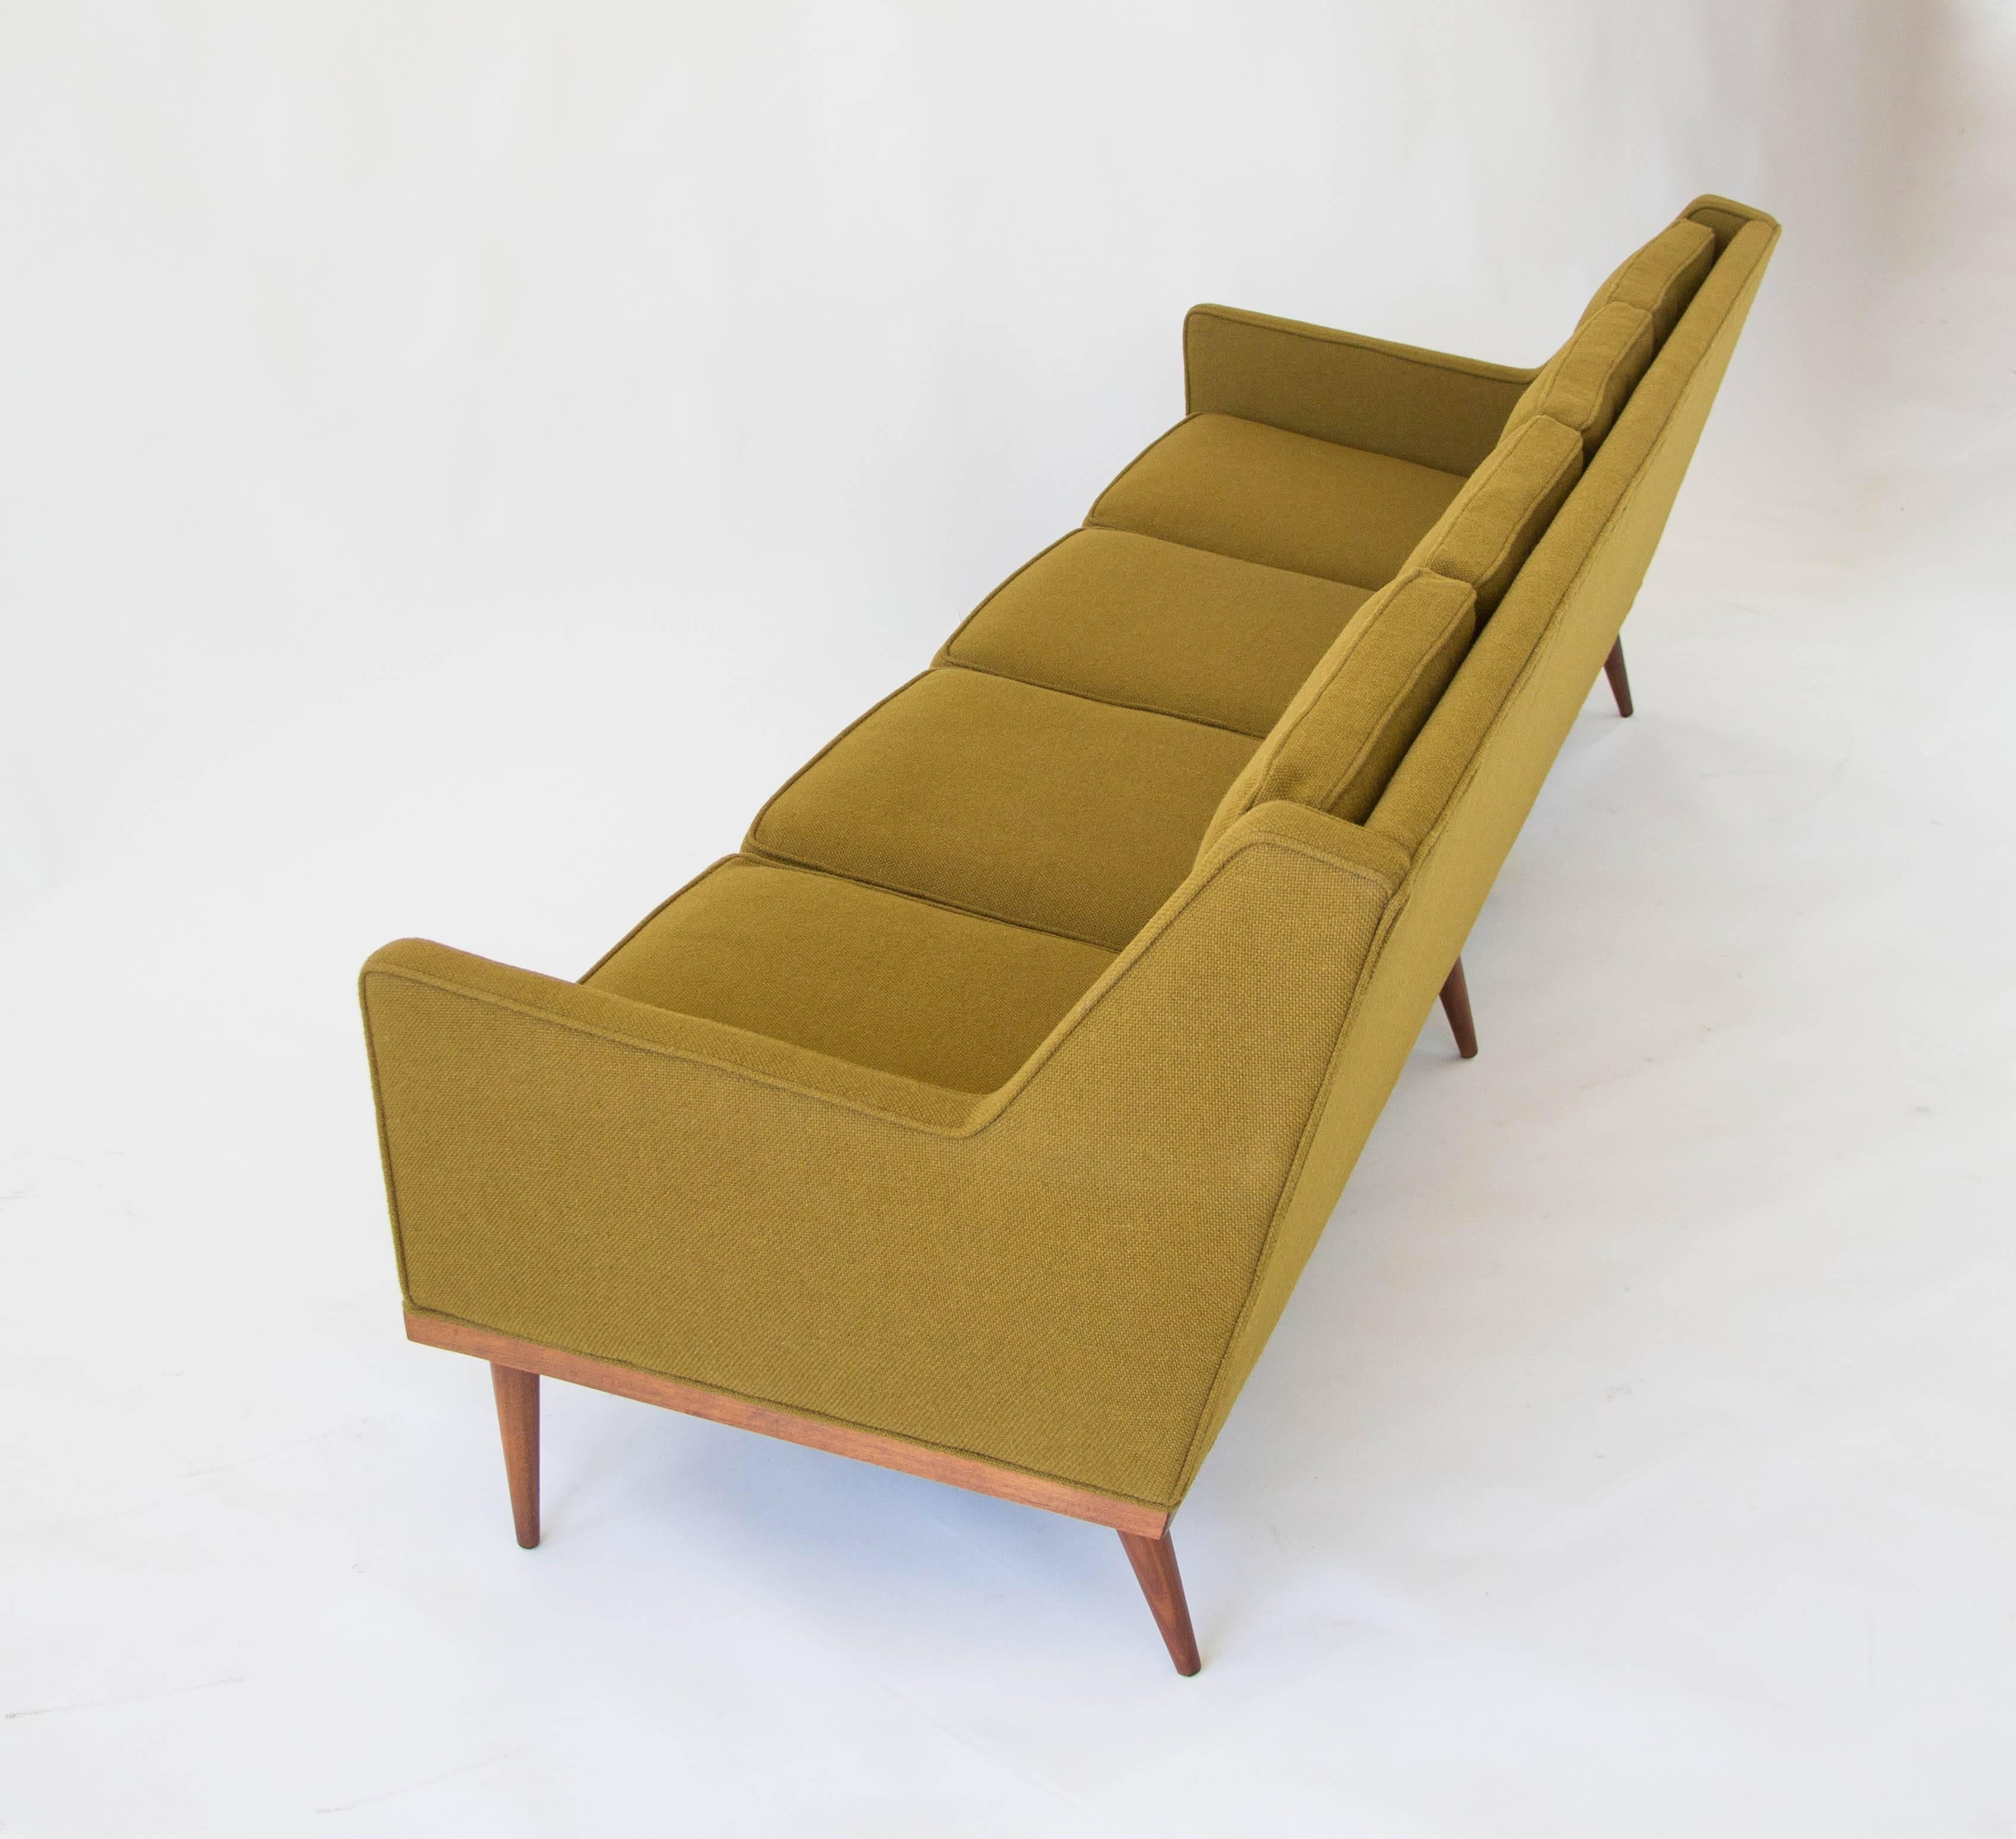 American 'Articulate Sofa' by Milo Baughman for James, Inc